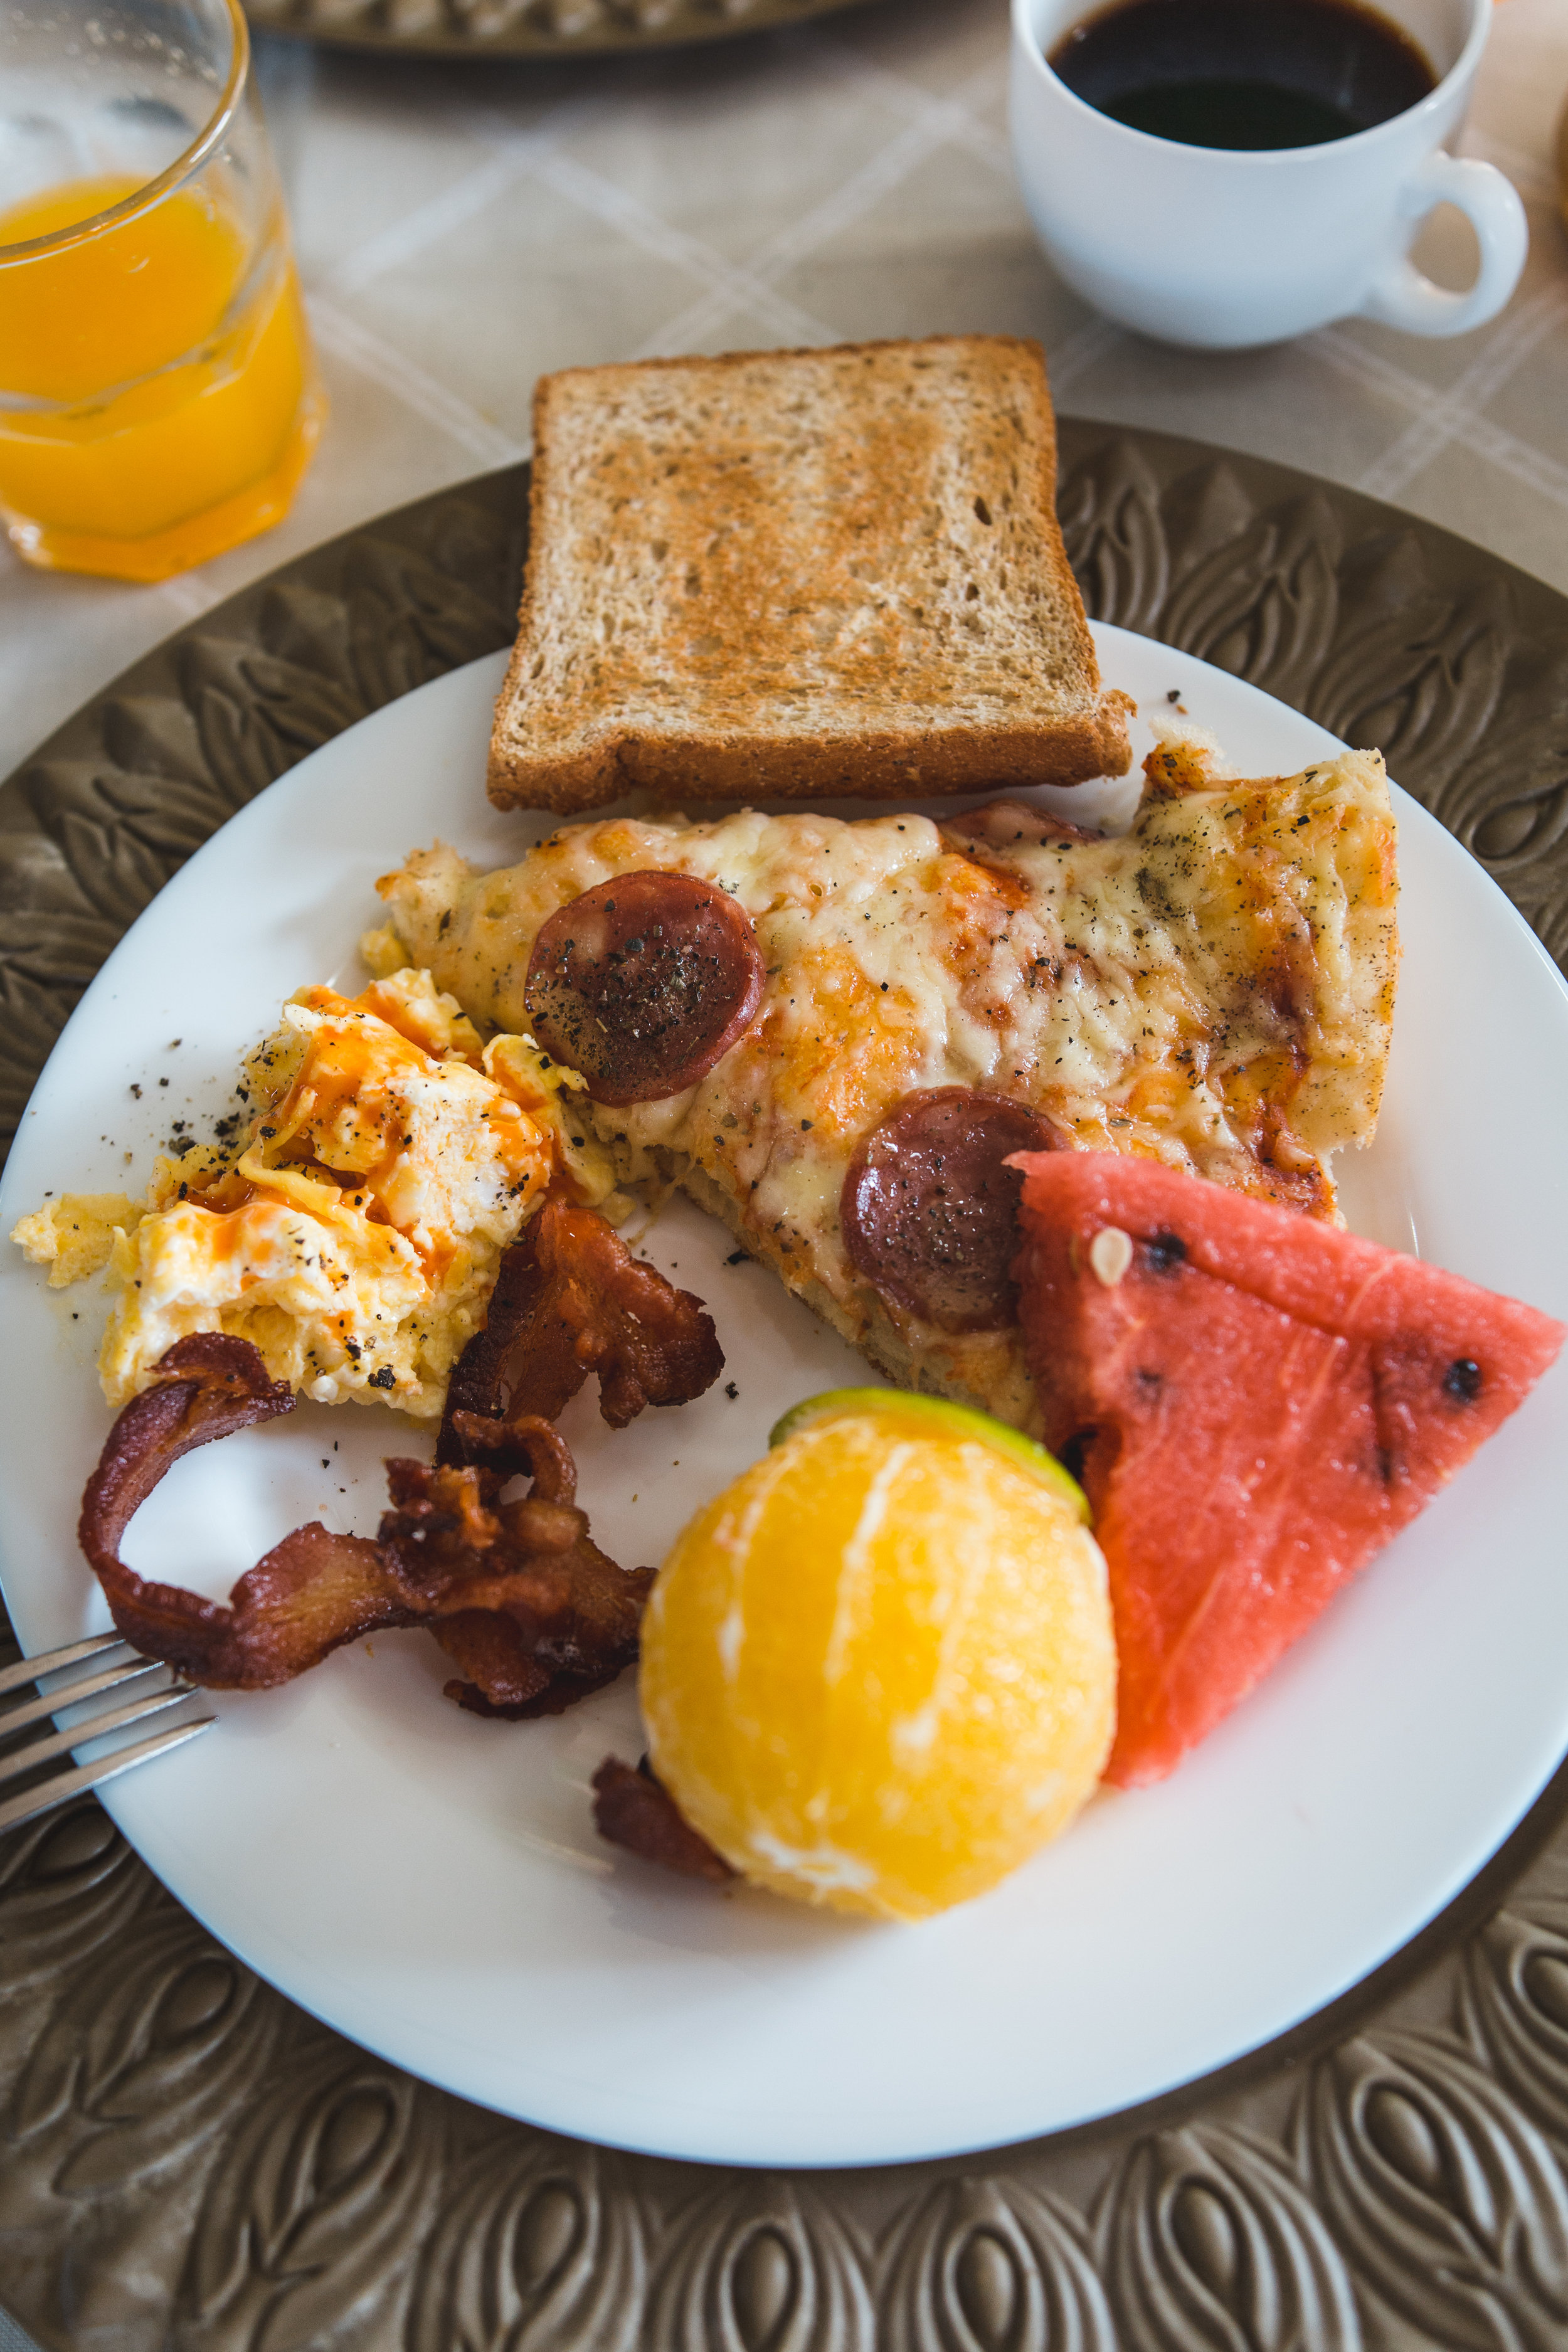  A typical breakfast, with fresh fruit, bacon, breakfast pizza, eggs, and the best coffee and juice on can drink! 